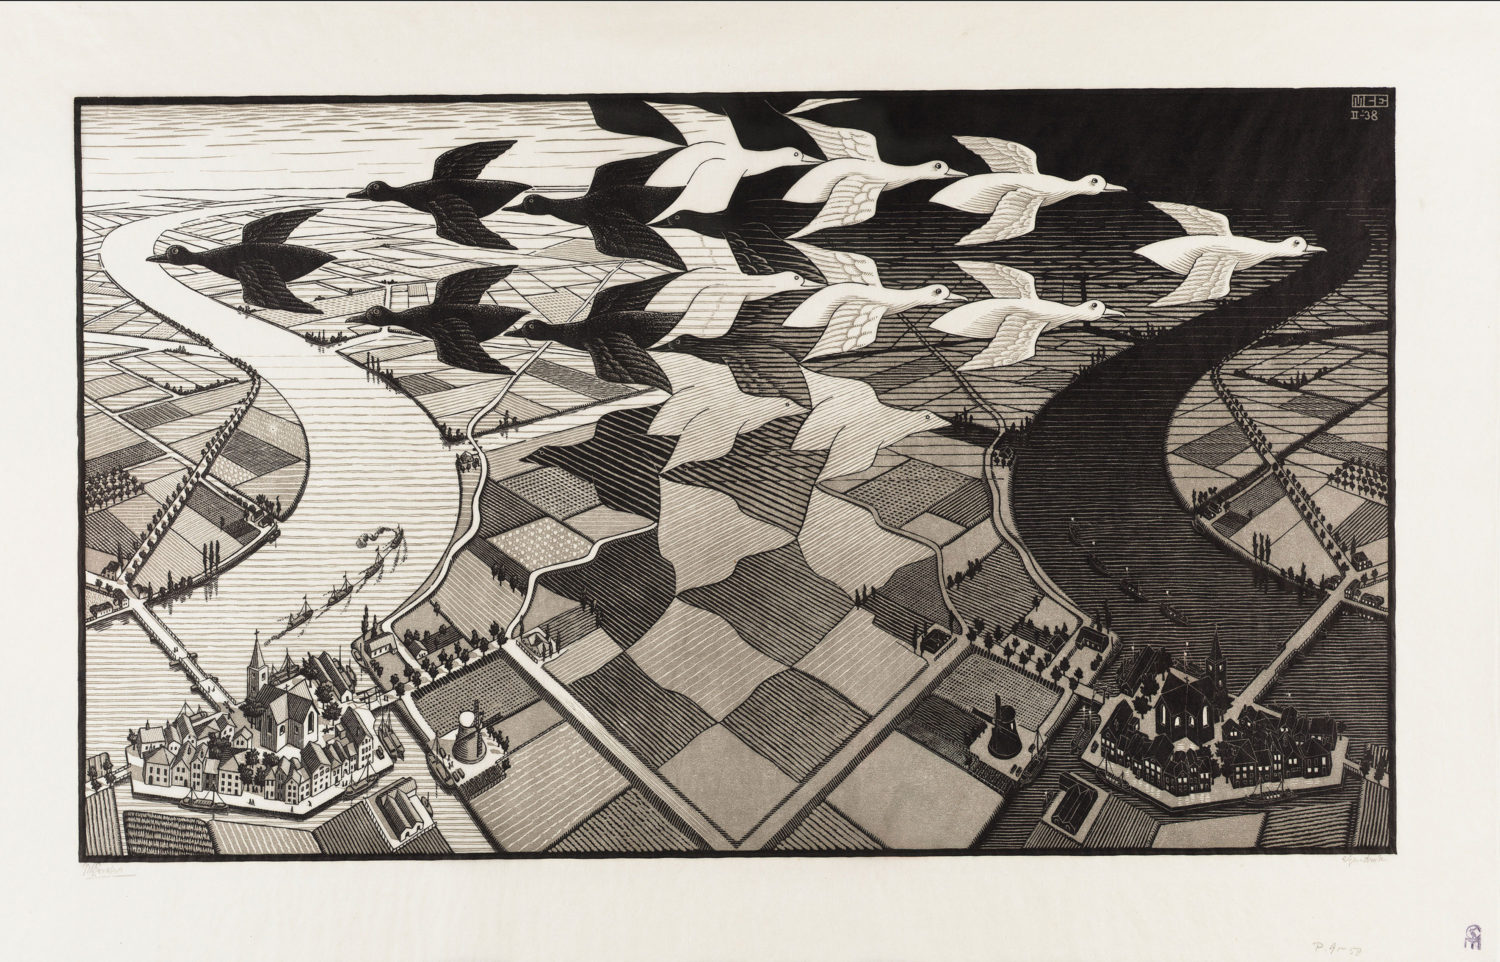 Day and Night by M.C. Escher © The M.C. Escher Company B.V. Baarn – the Netherlands